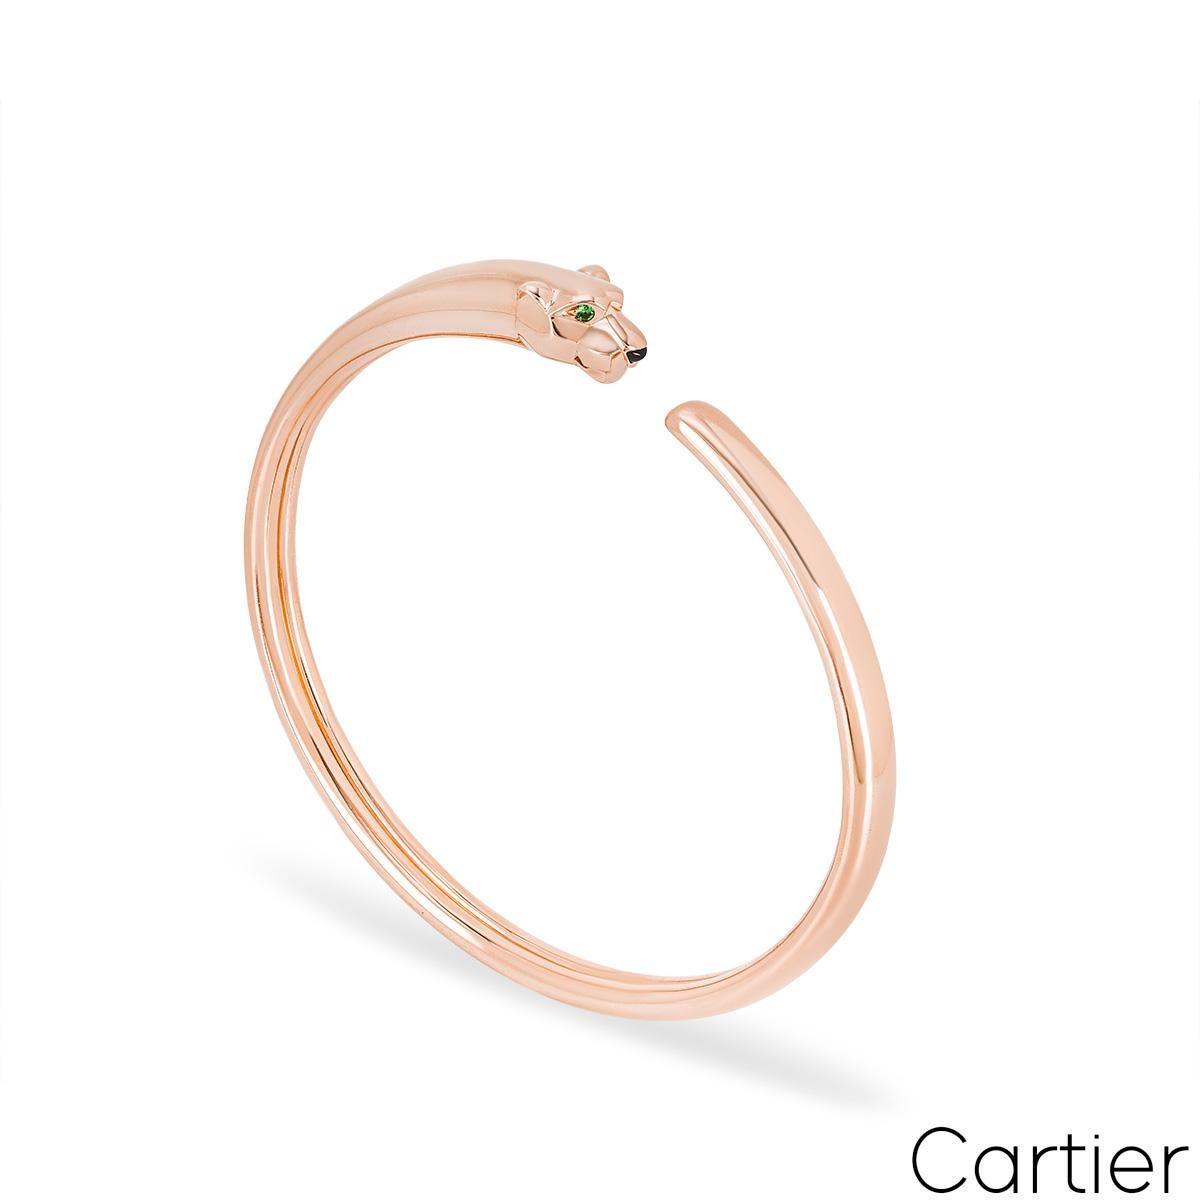 A striking 18k rose gold bracelet by Cartier from the Panthere de Cartier collection. The bracelet comprises of a panther head motif set with 2 round tsavorites as eyes and an onyx nose. This bracelet is size 16 and has a gross weight of 24.04